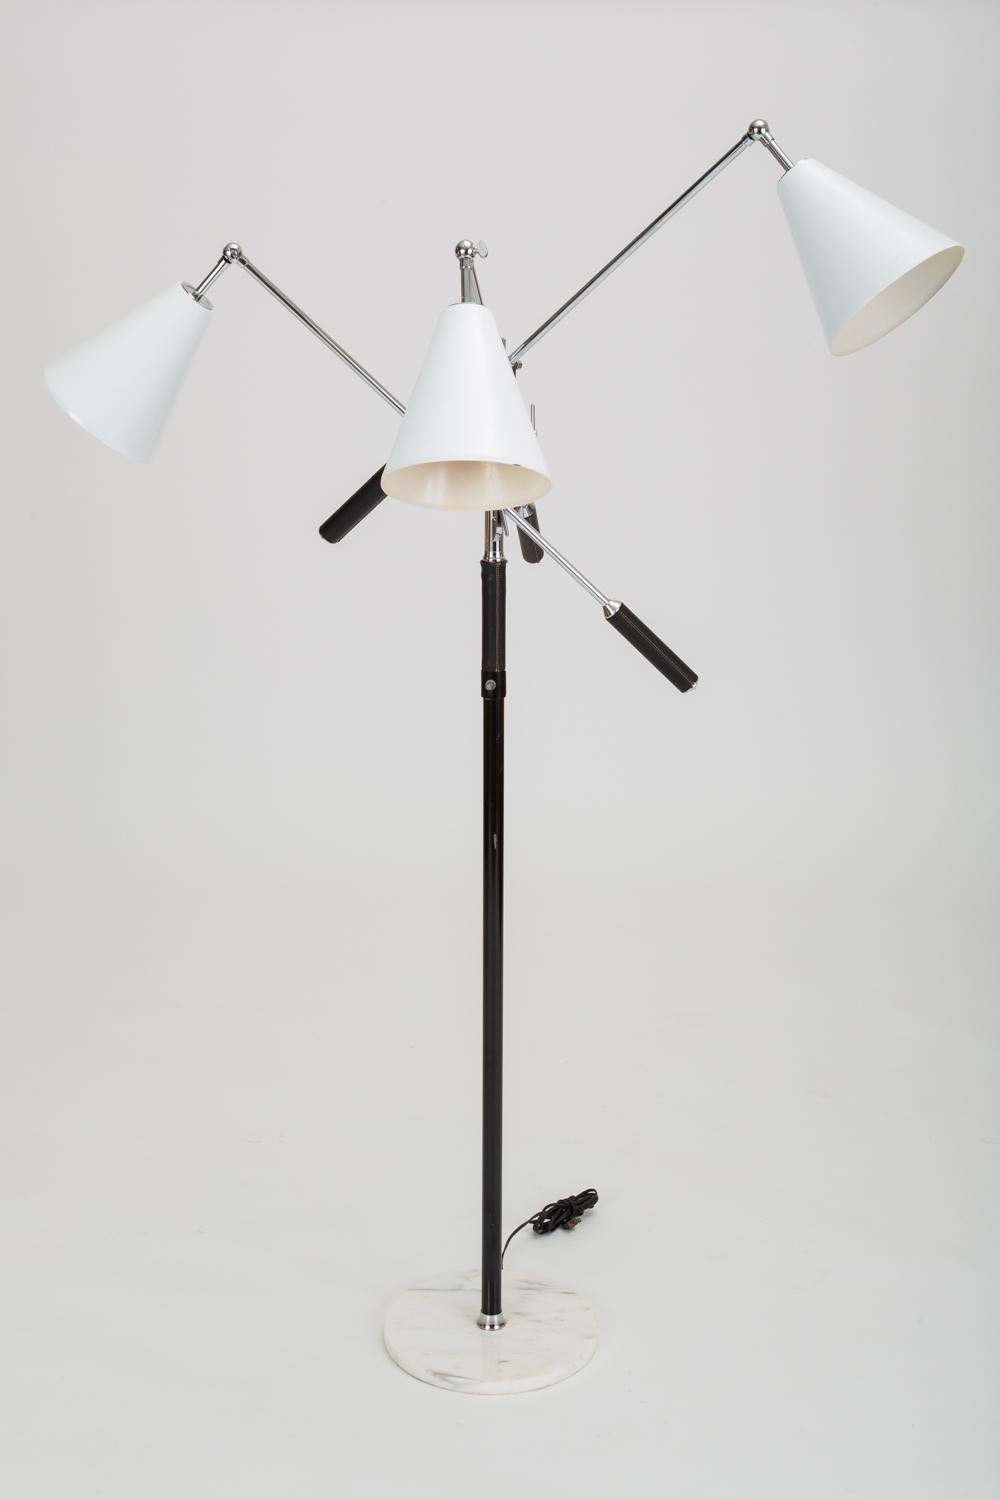 An Italian modernist lamp from the 1950s. The tall floor lamp has a round base in Carrara marble, a central steel post wrapped in leather with ivory contrast stitching, and three counterbalanced arms, each terminating in an adjustable lampshade of